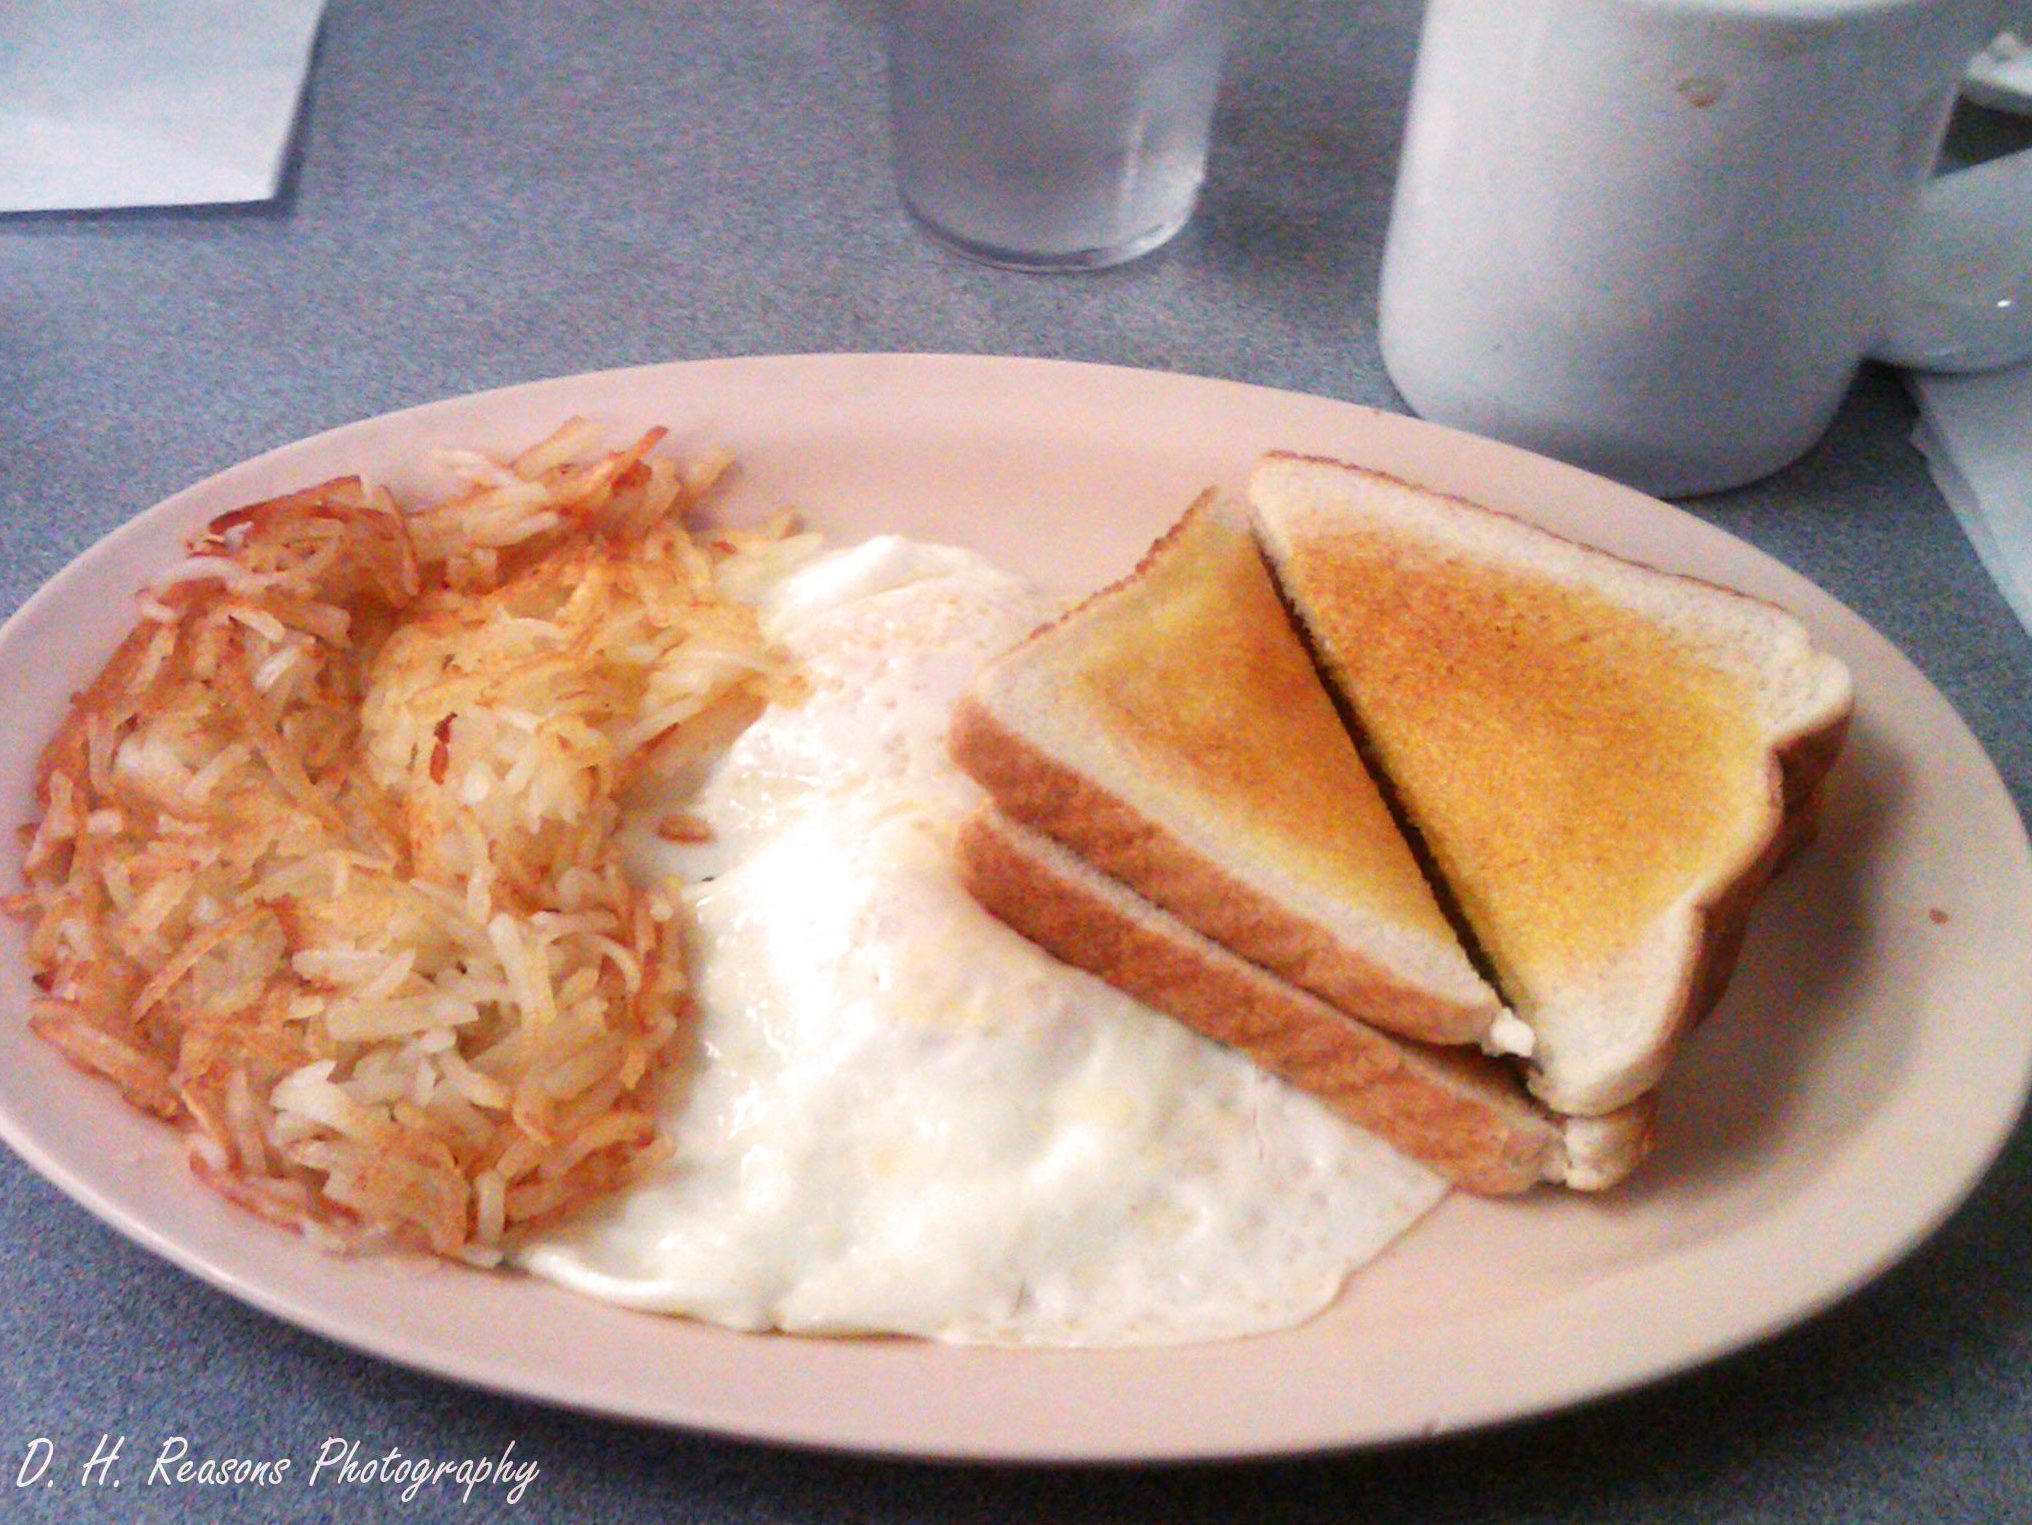 Foley Coffee Shop - Eggs and Hashbrowns